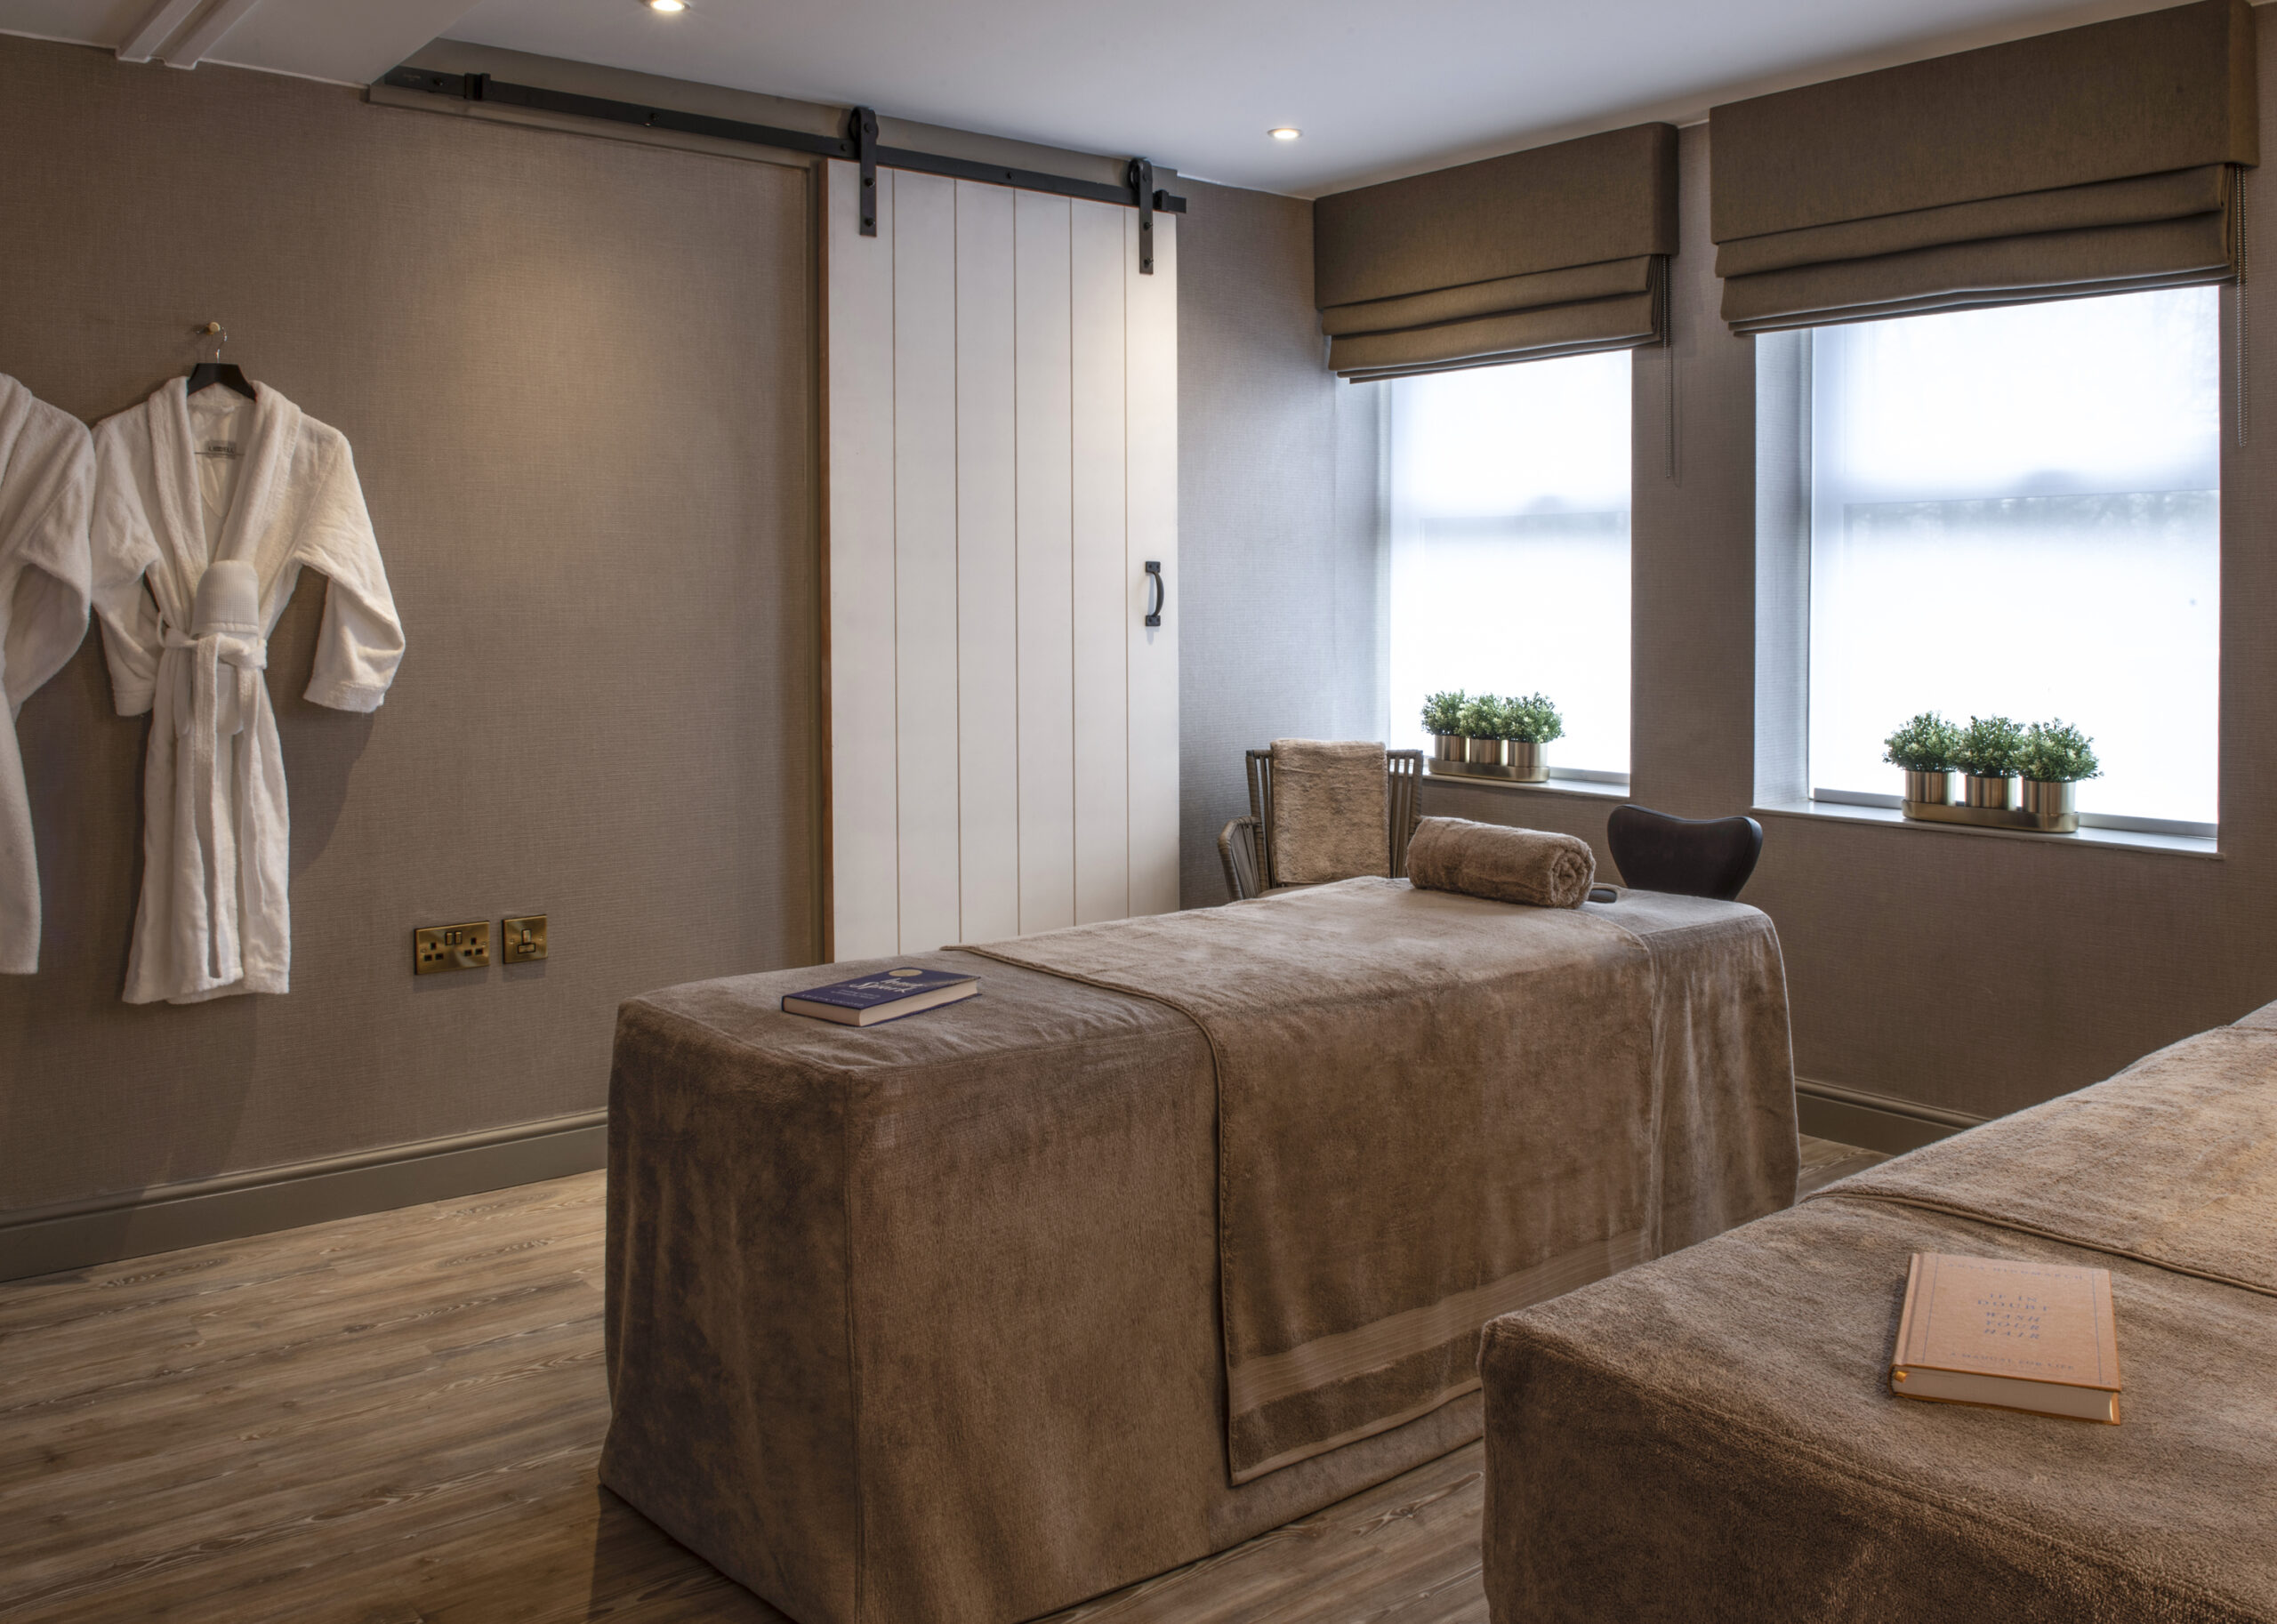 Picture of a treatment room at the H Spa at Horwood House Hotel